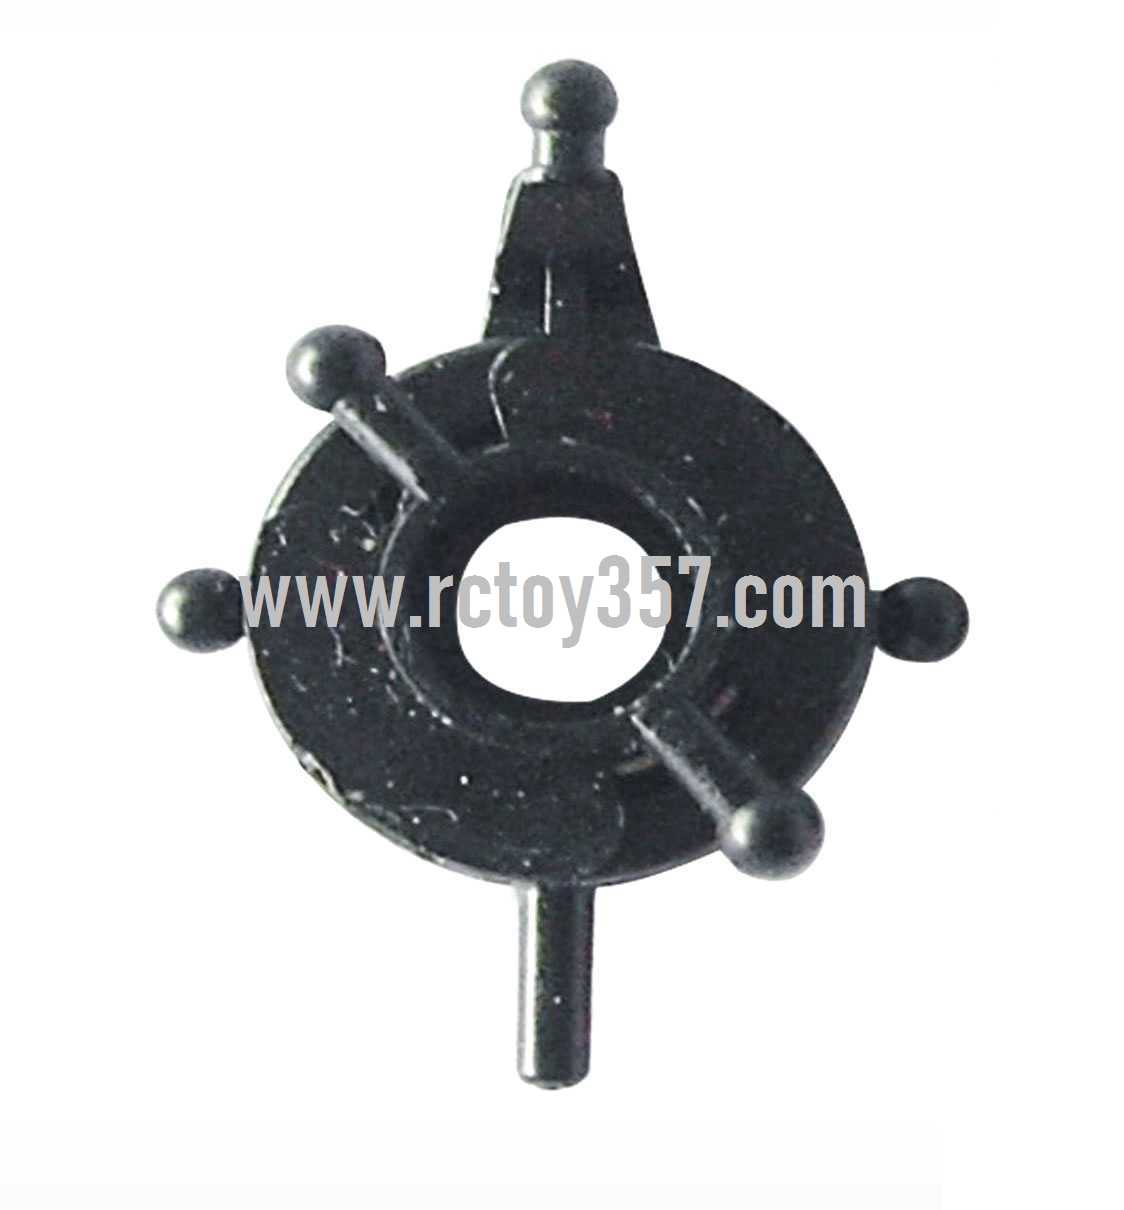 RCToy357.com - Shuang Ma/Double Hors 9103 toy Parts Swash plate